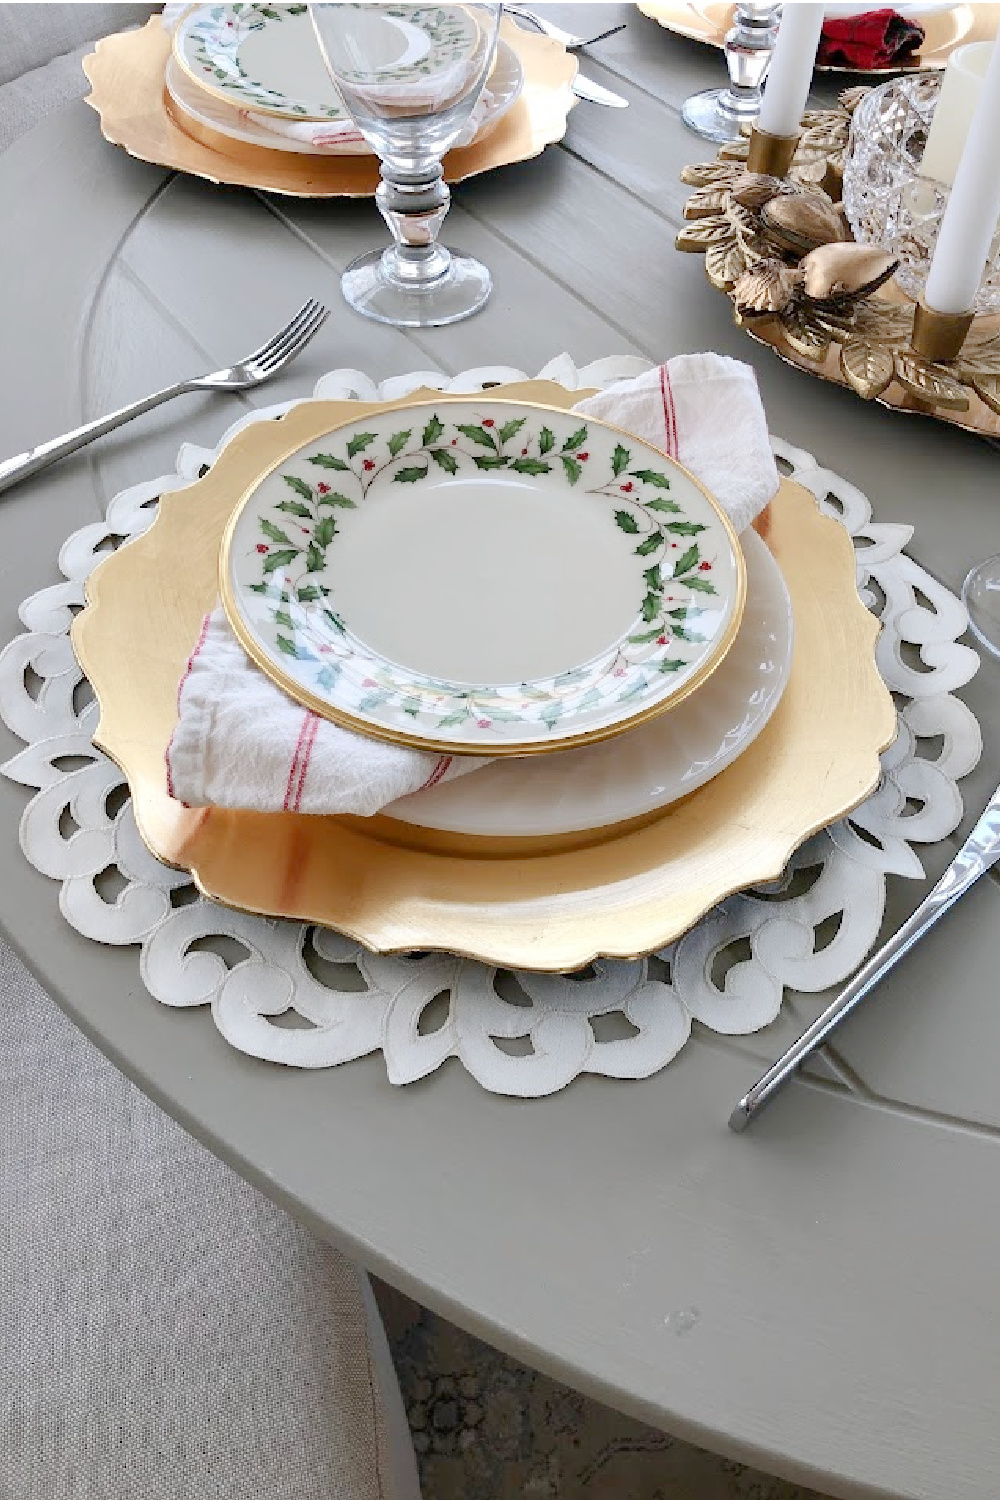 Lenox Holiday china, gold charger and scalloped placemat on our Thanksgiving table - Hello Lovely Studio. #lenox #holidaychina #hollypattern